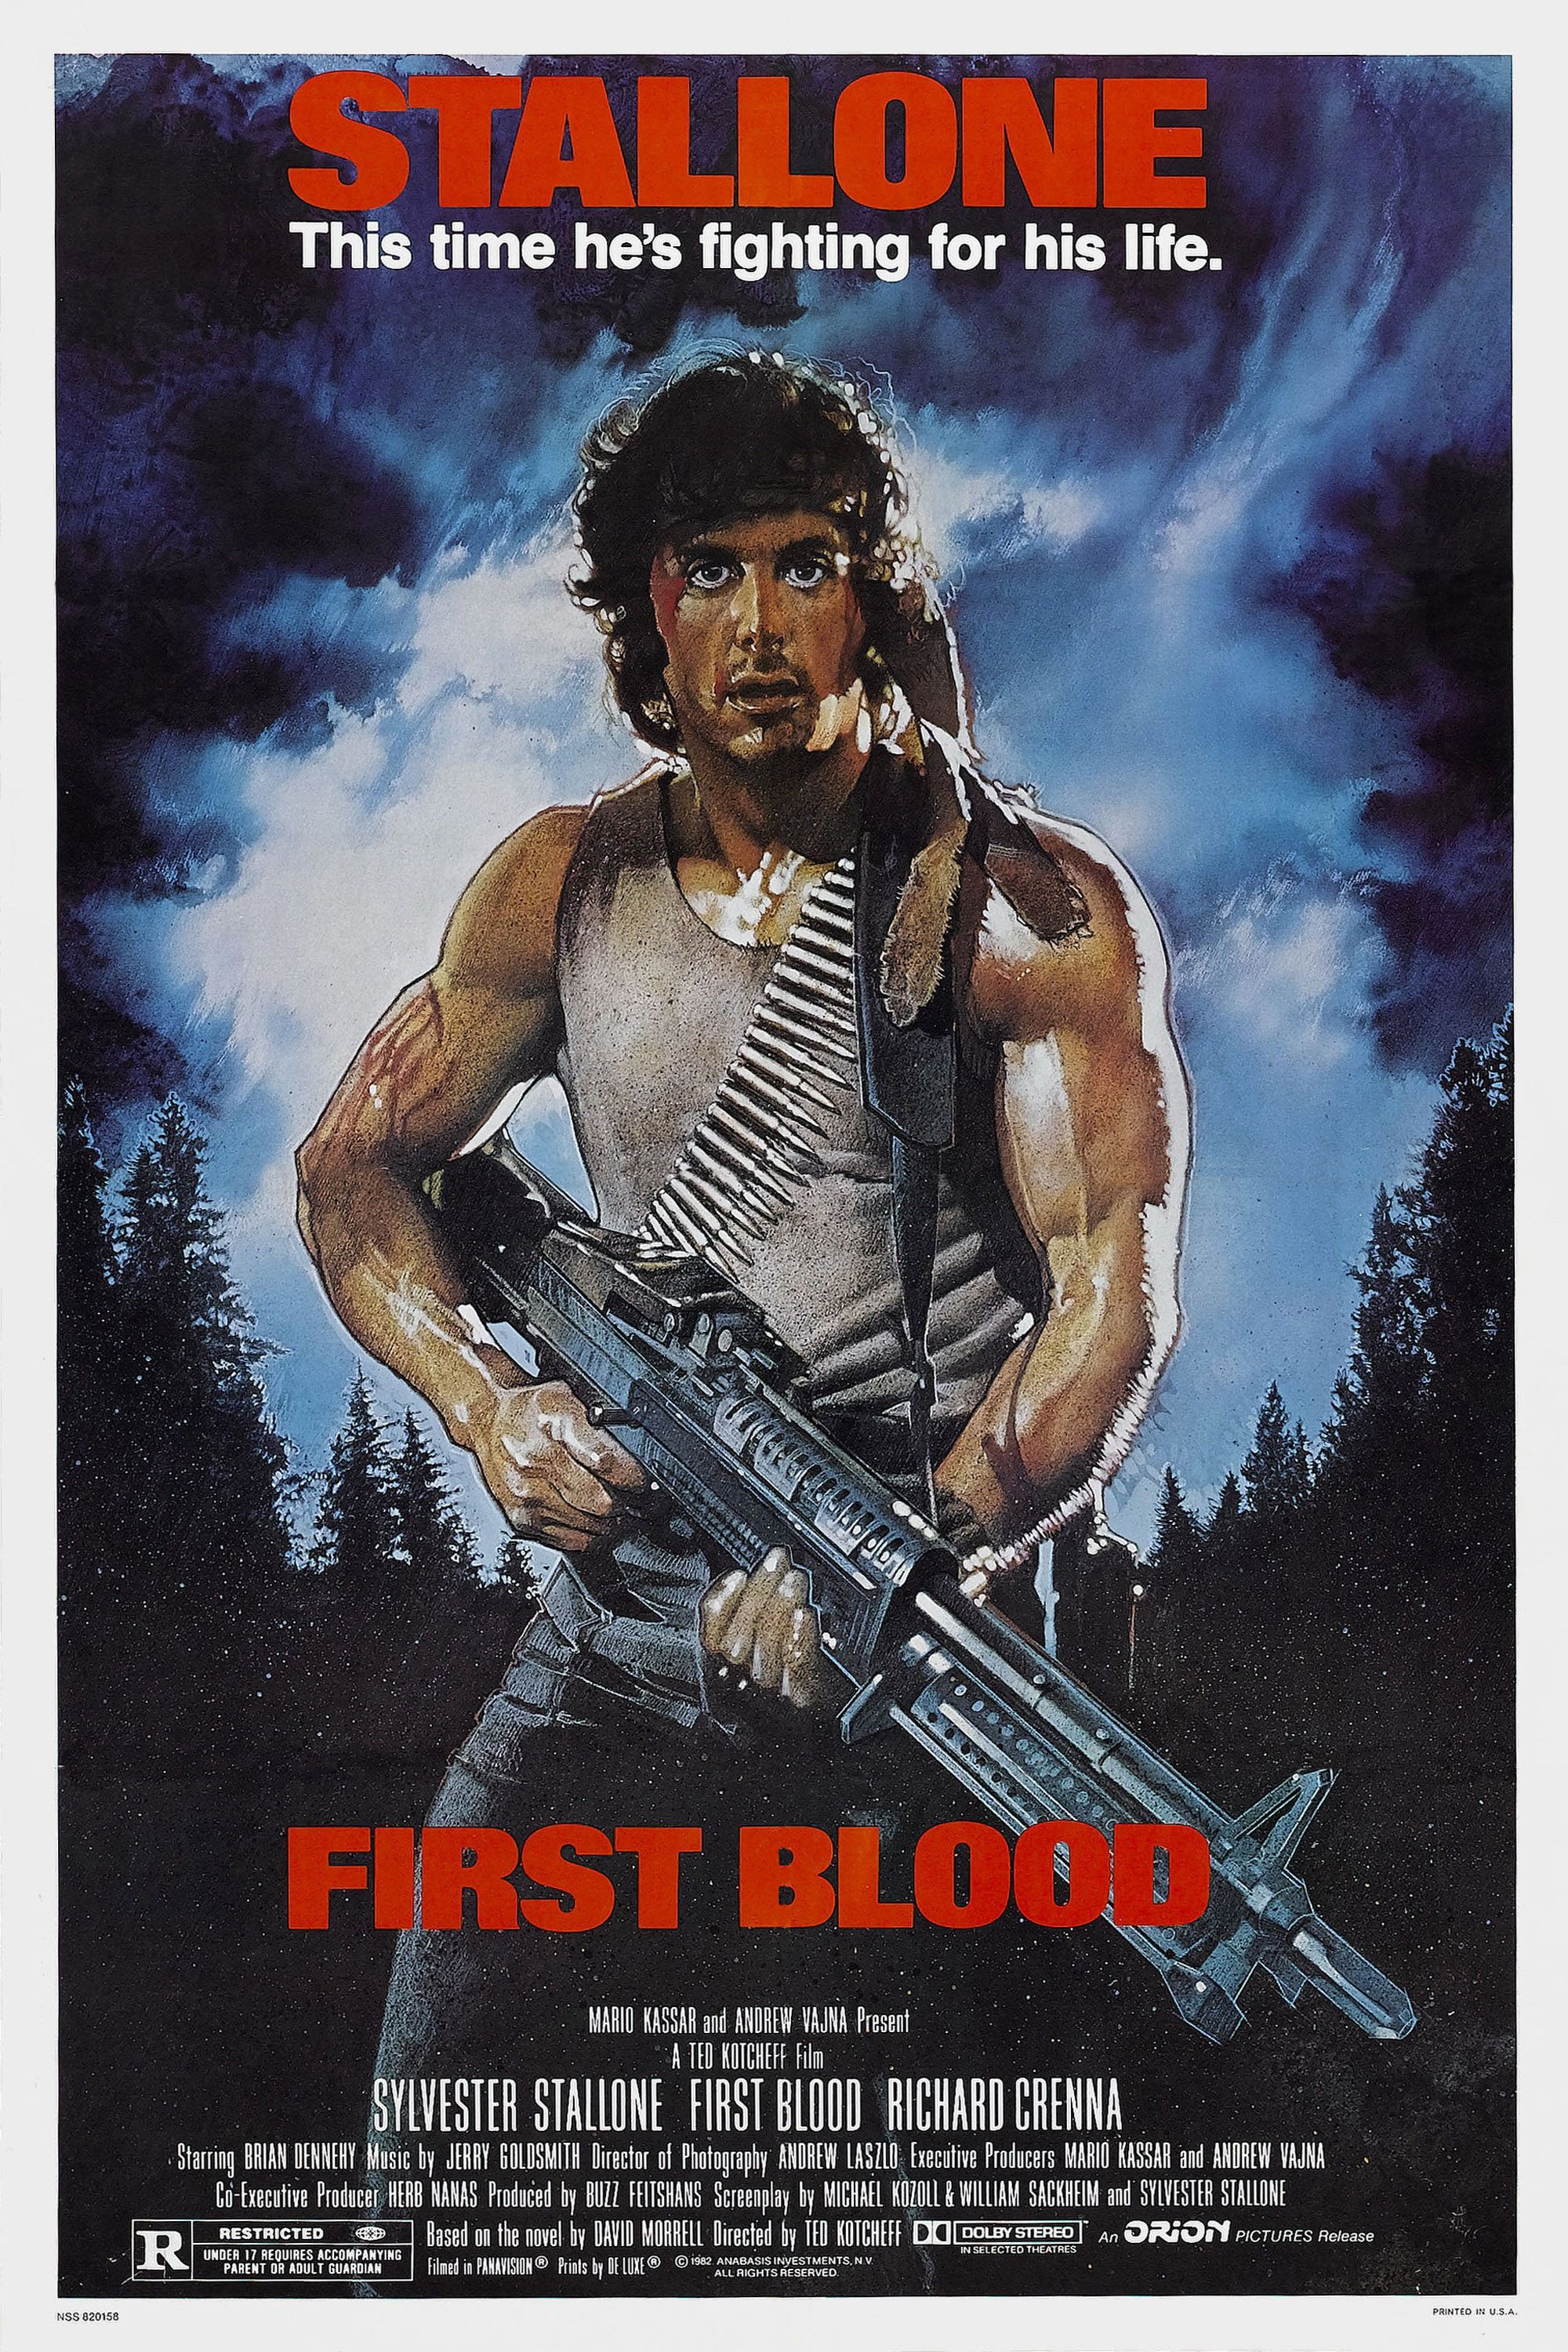 rambo first blood download movie